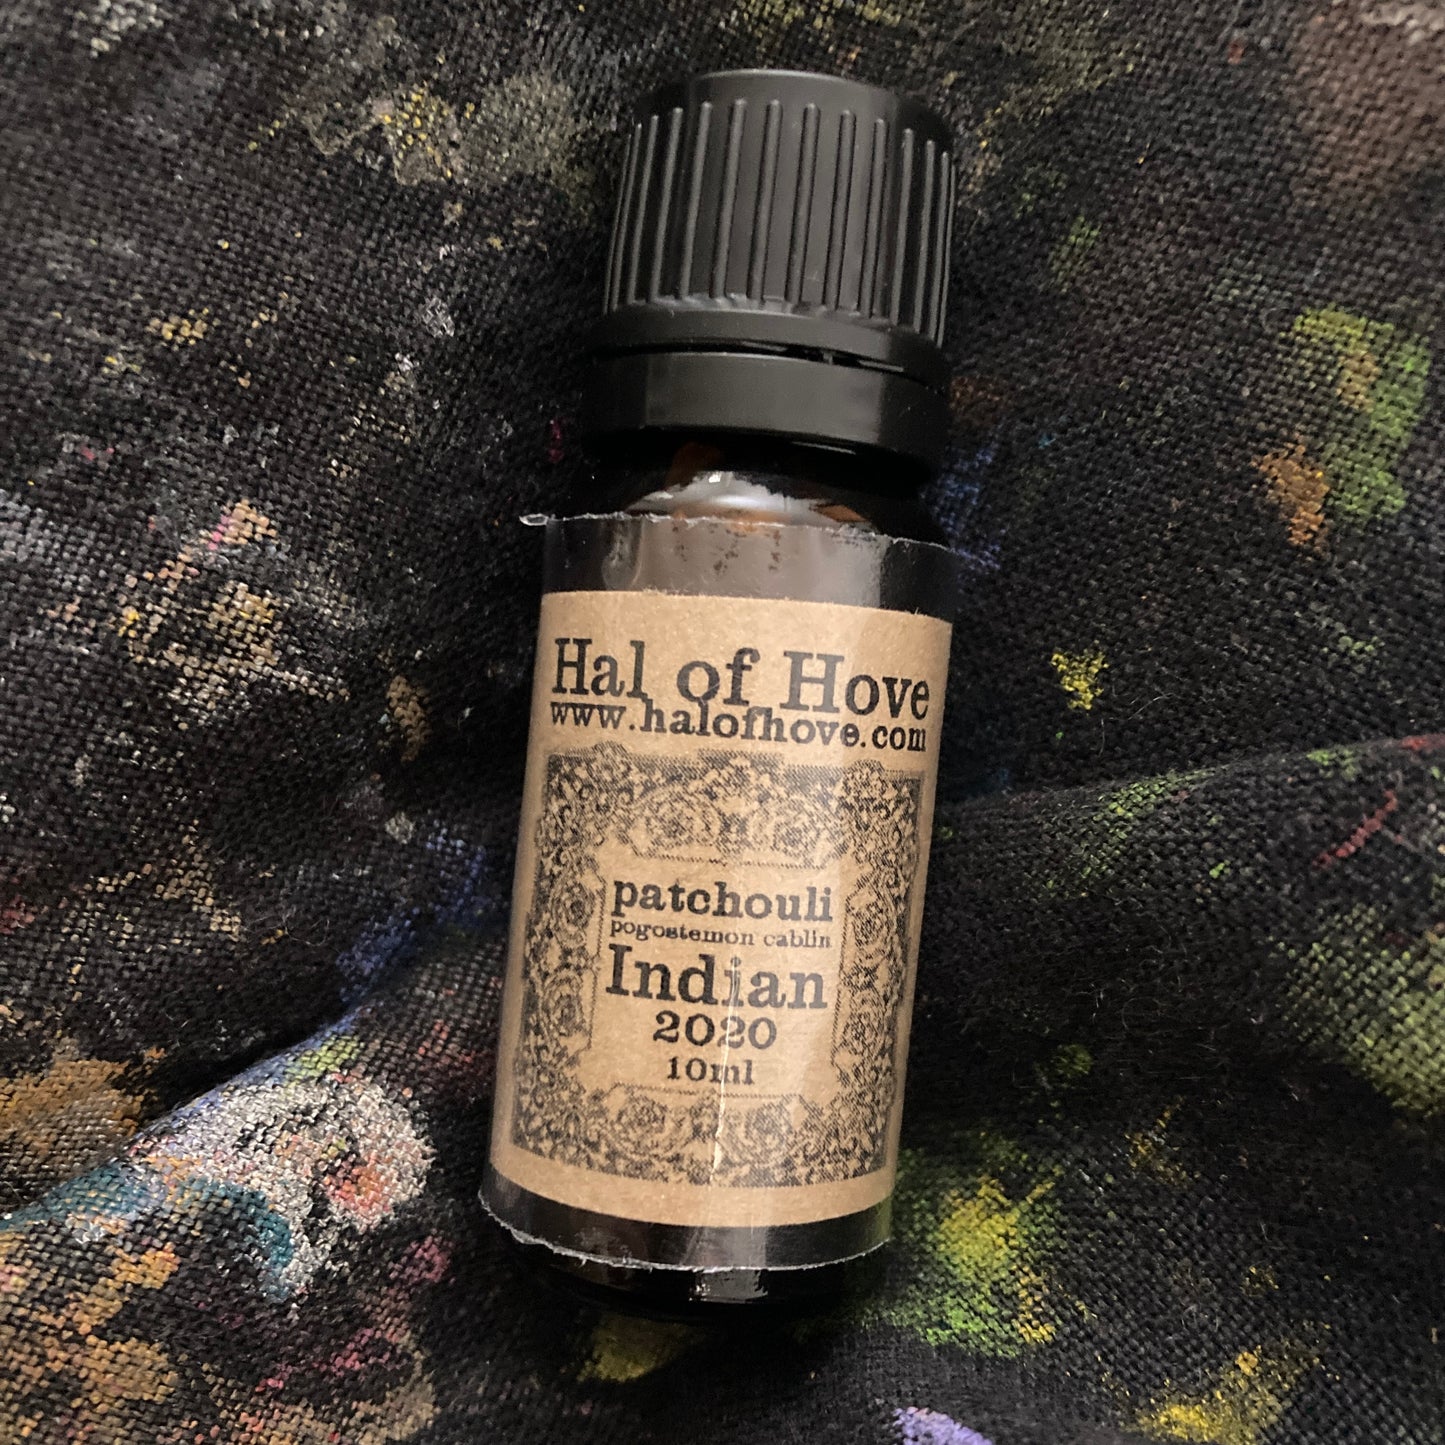 Aged Patchouli Oil (Indian)